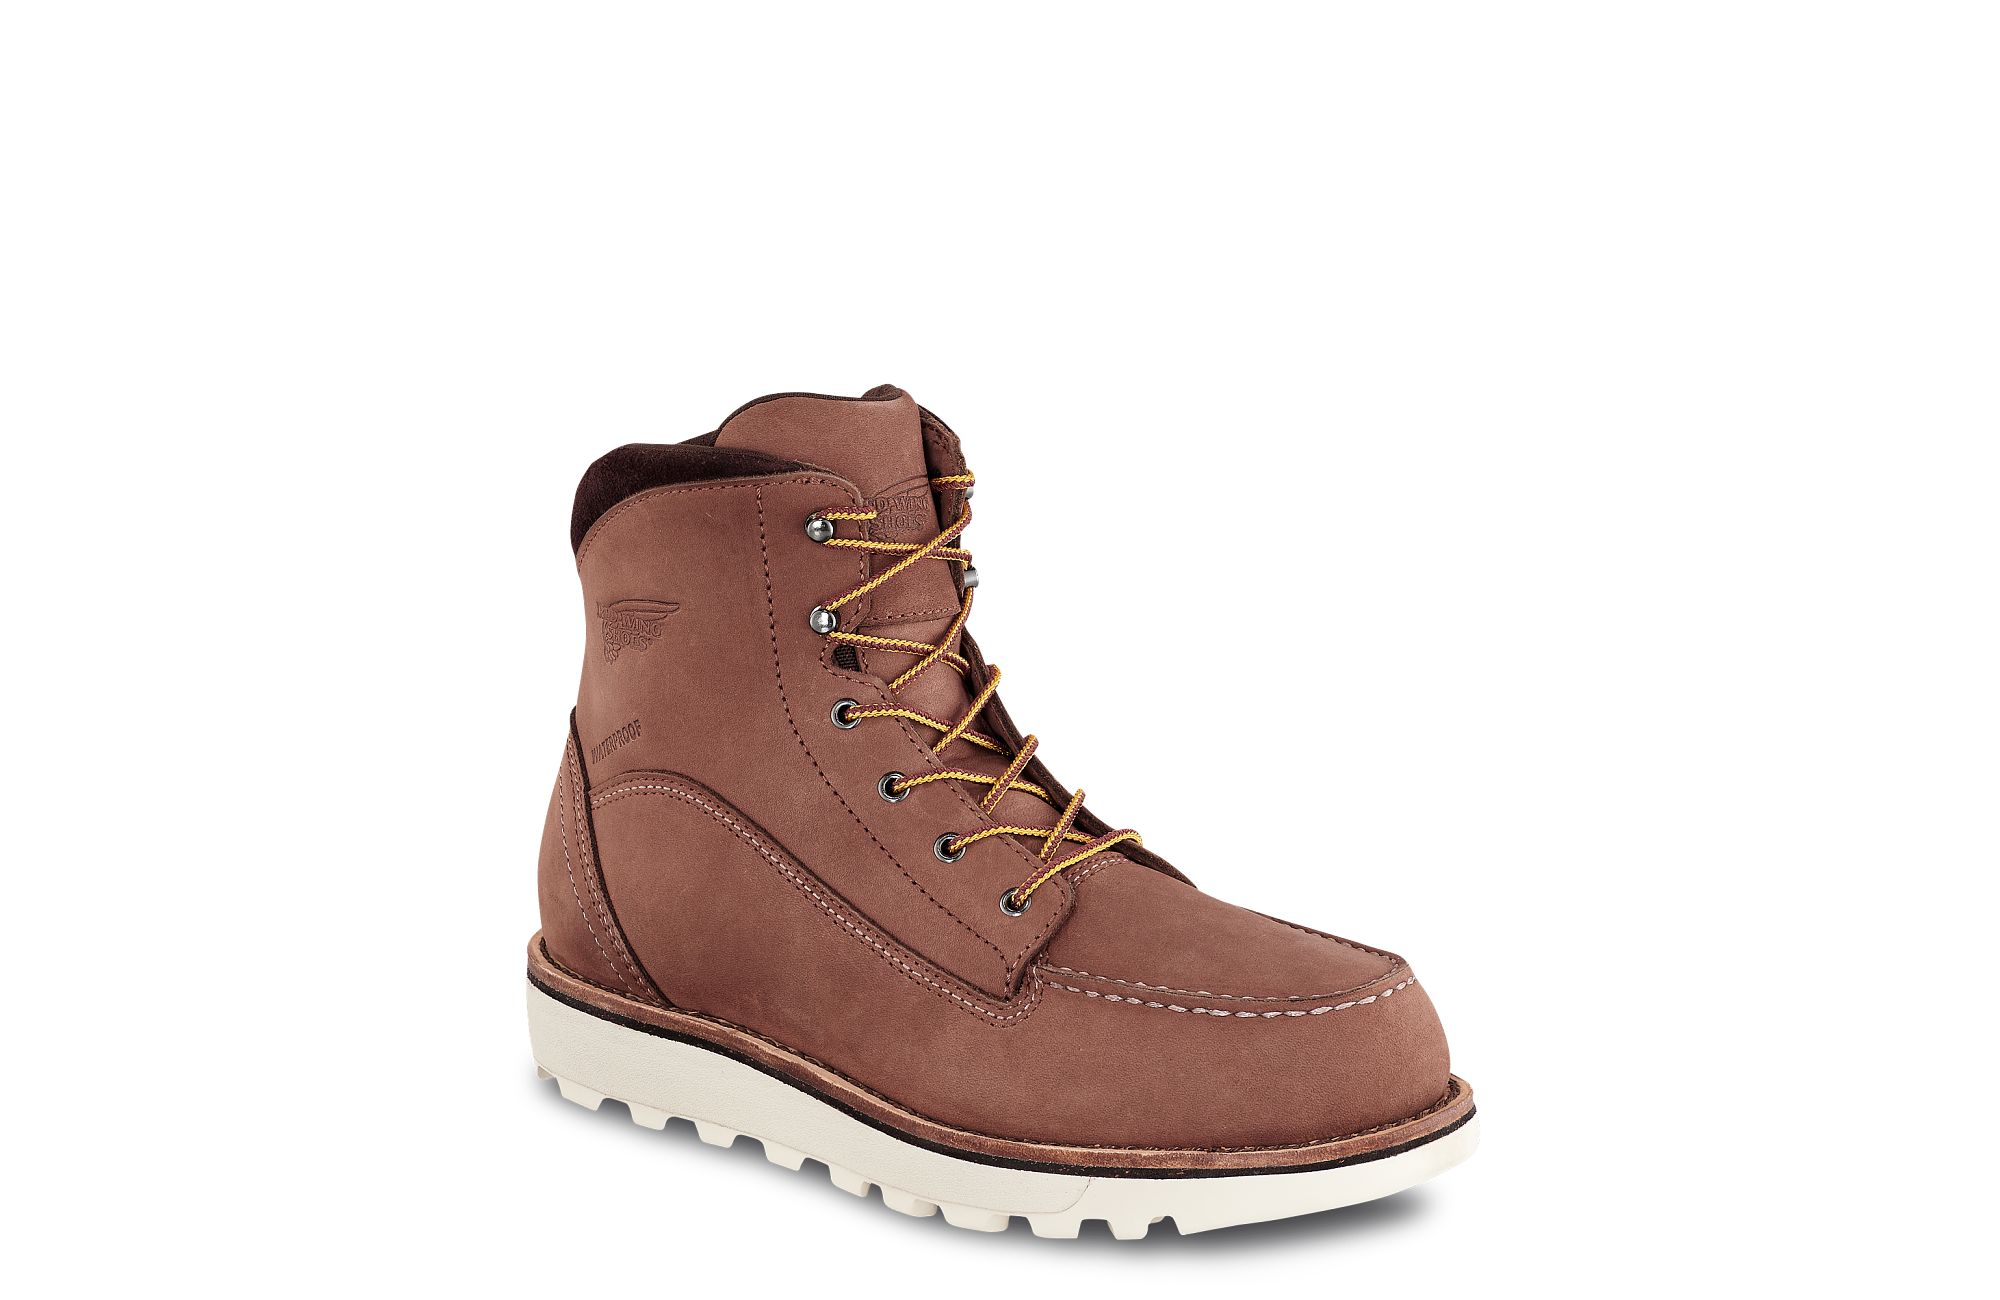 Traction Tred Lite | Red Wing